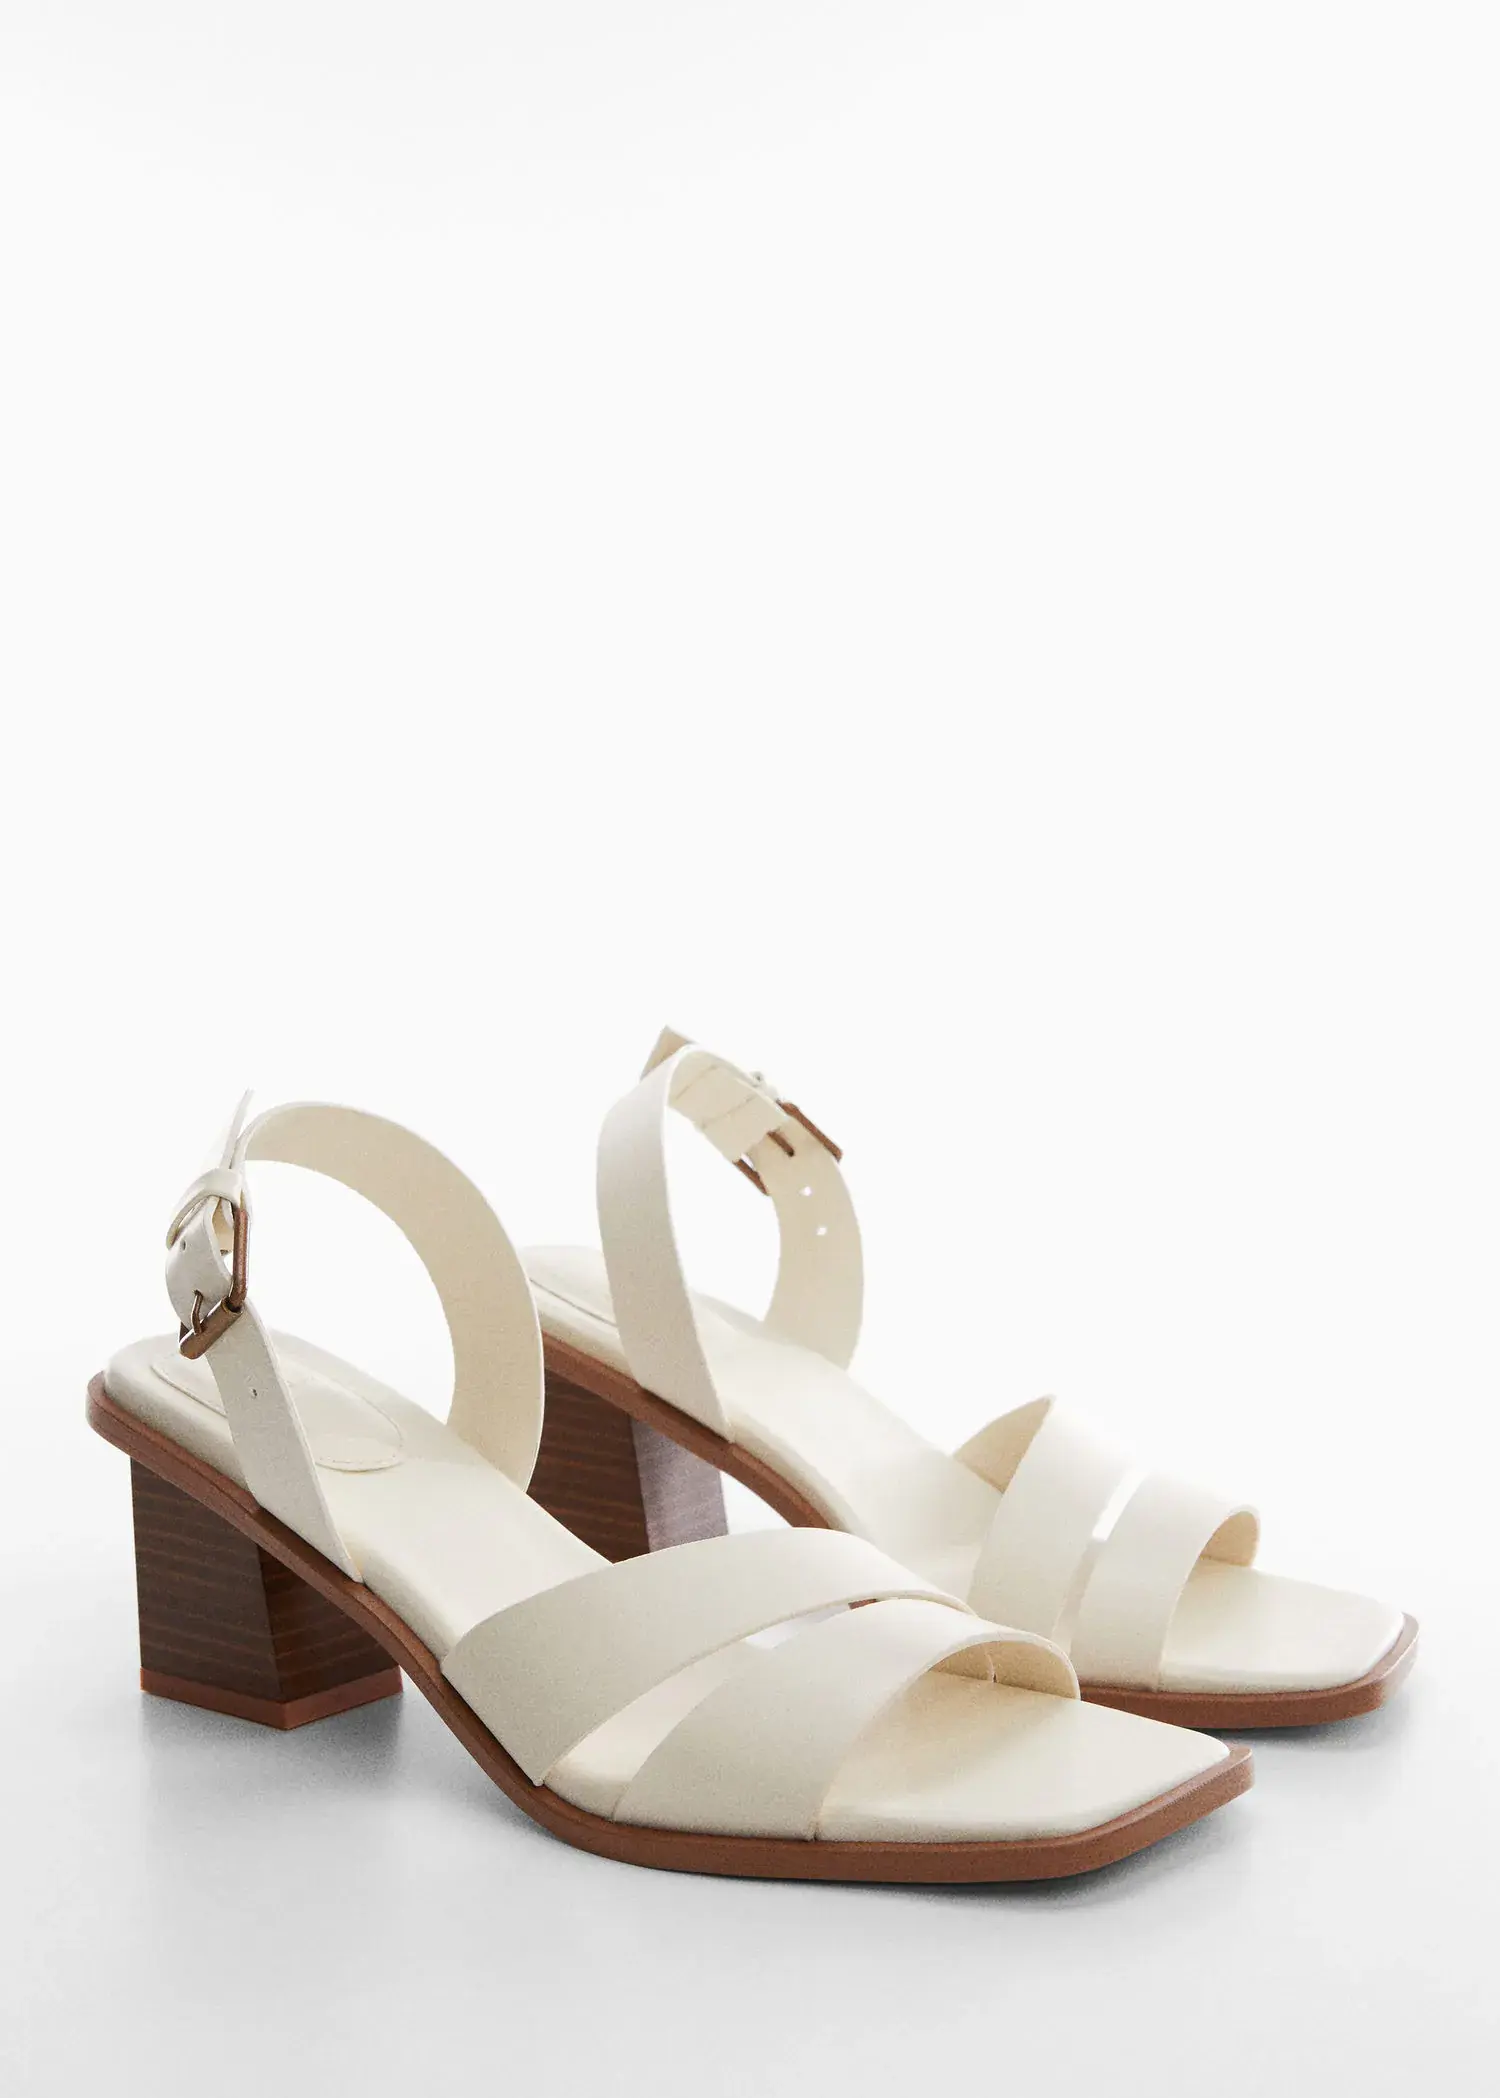 Mango Block-heel sandals. a pair of white sandals sitting on top of a table. 